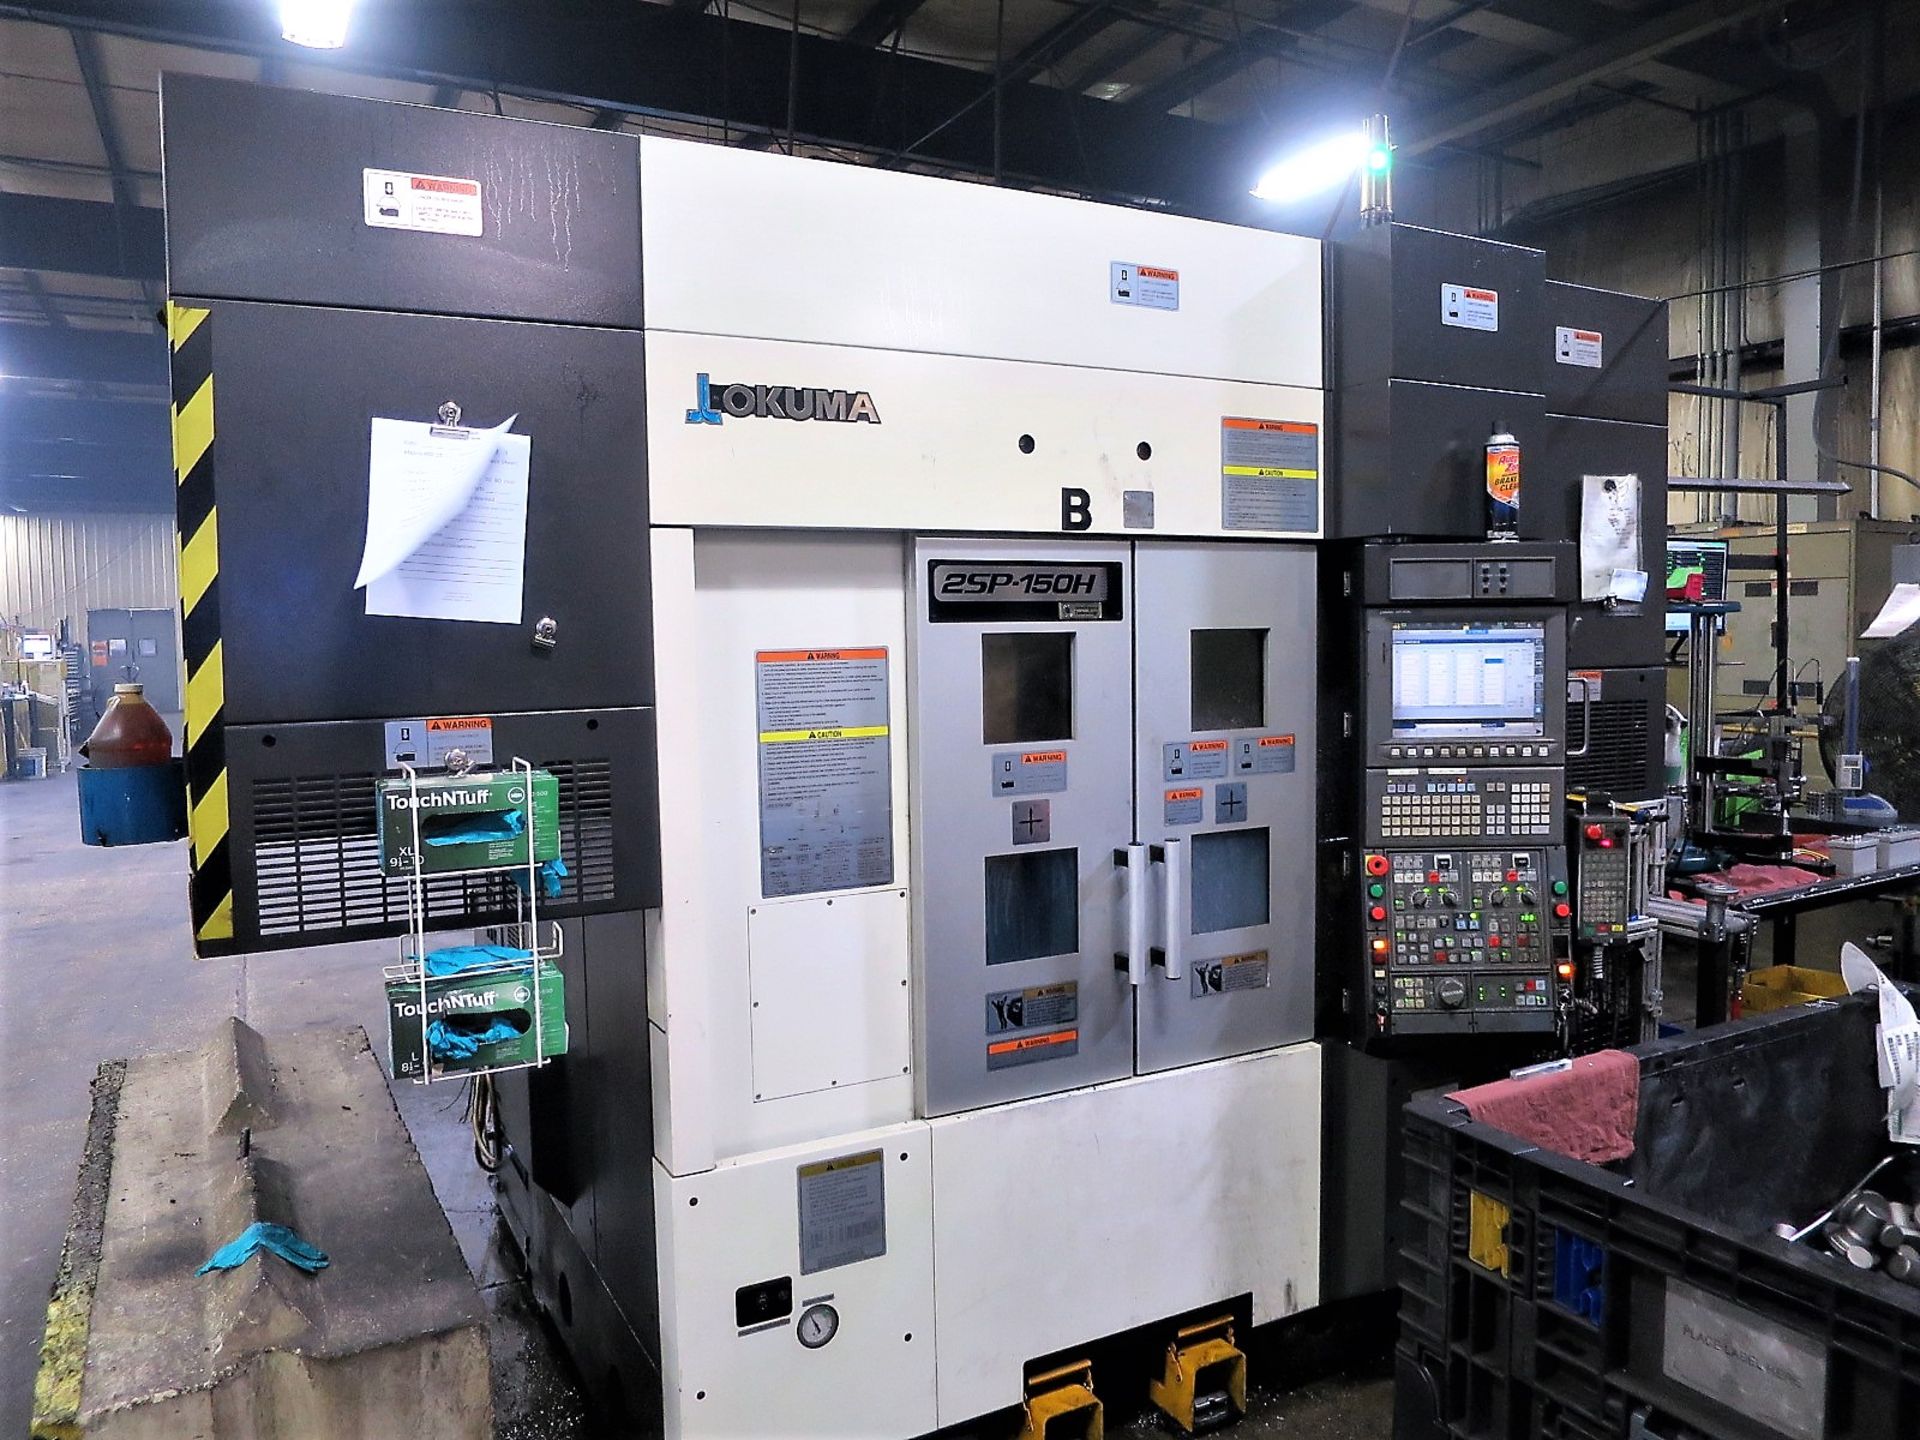 OKUMA 2SP-150HM TWIN SPINDLE TWIN TURRET CNC LATHE W/MILLING & ROBOTIC LOADER, NEW 2016, S/N 192503